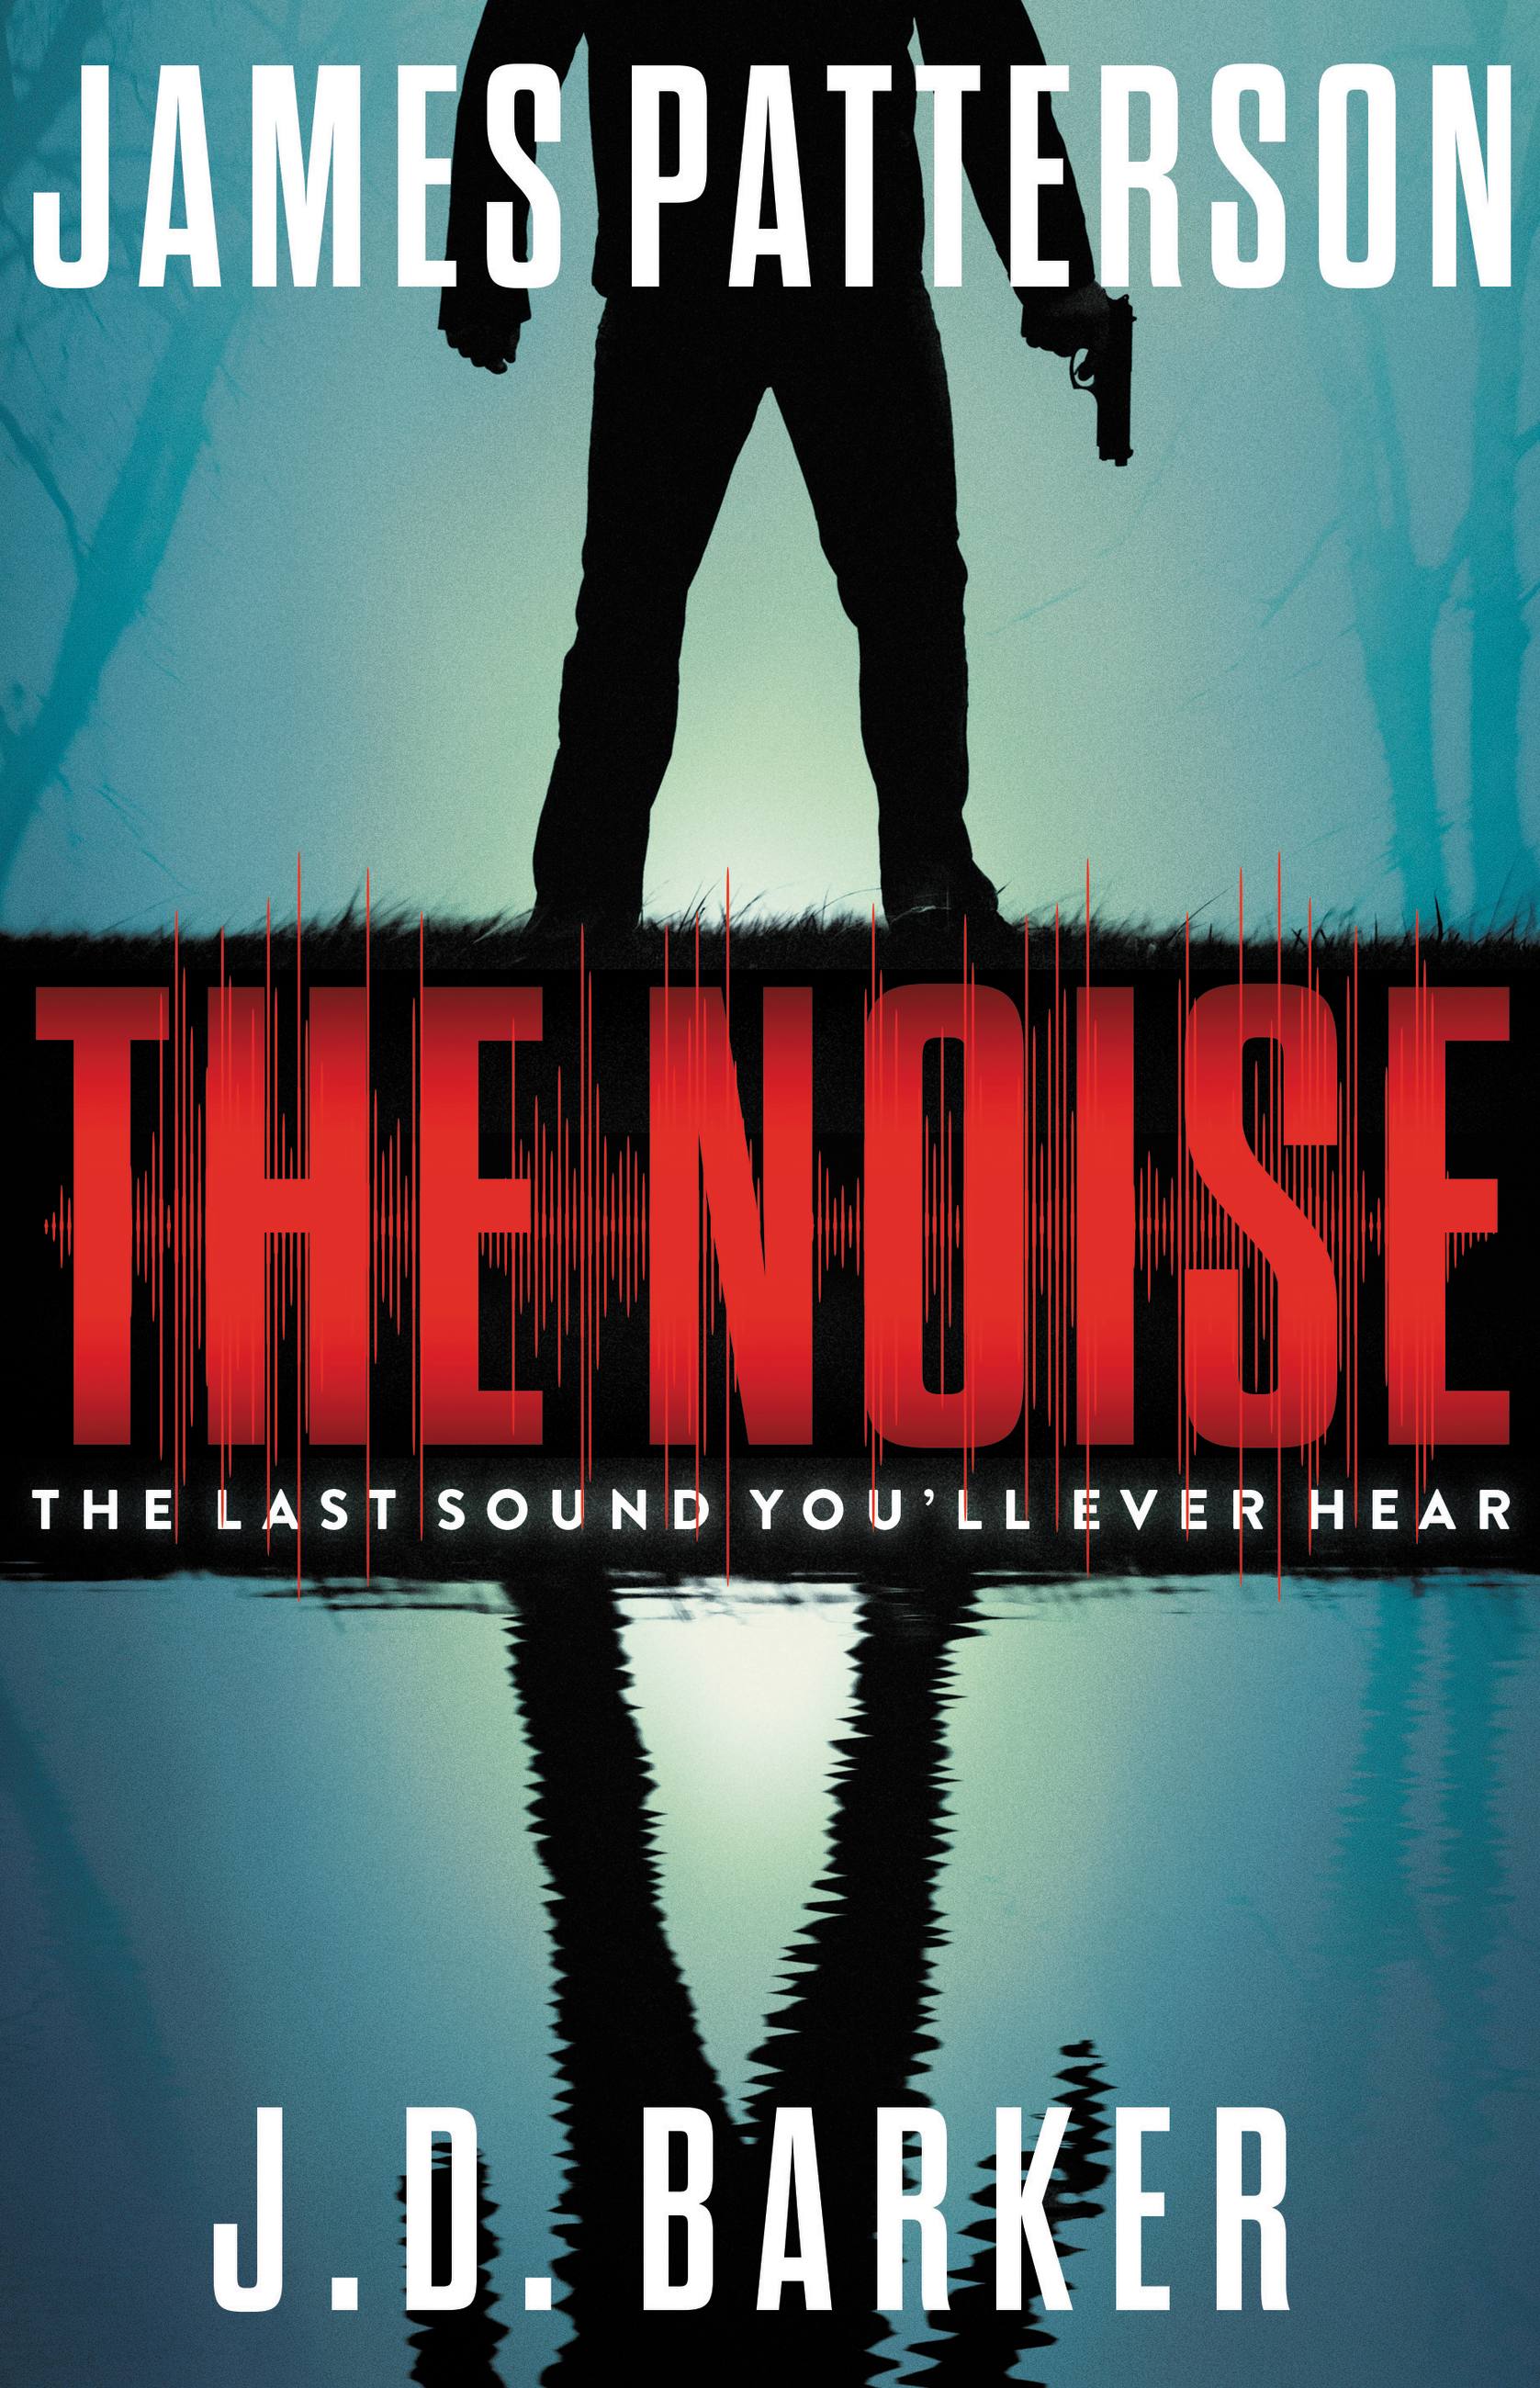 the noise by james patterson